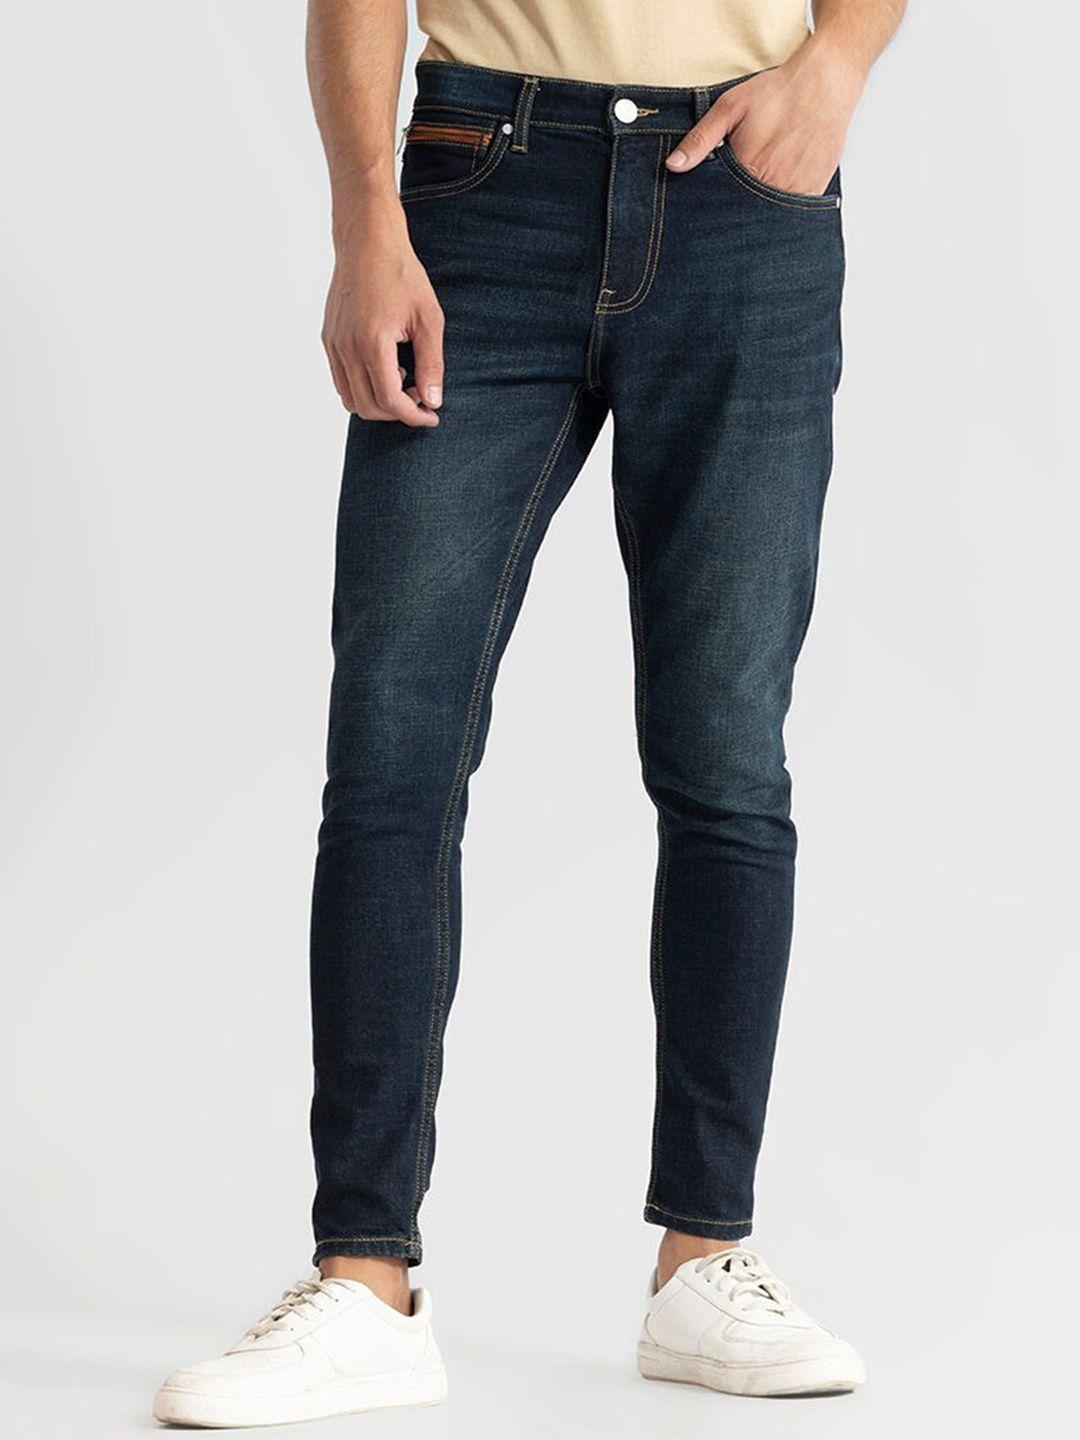 snitch-men-classic-skinny-fit-whiskers-and-chevrons-clean-look-stretchable-jeans